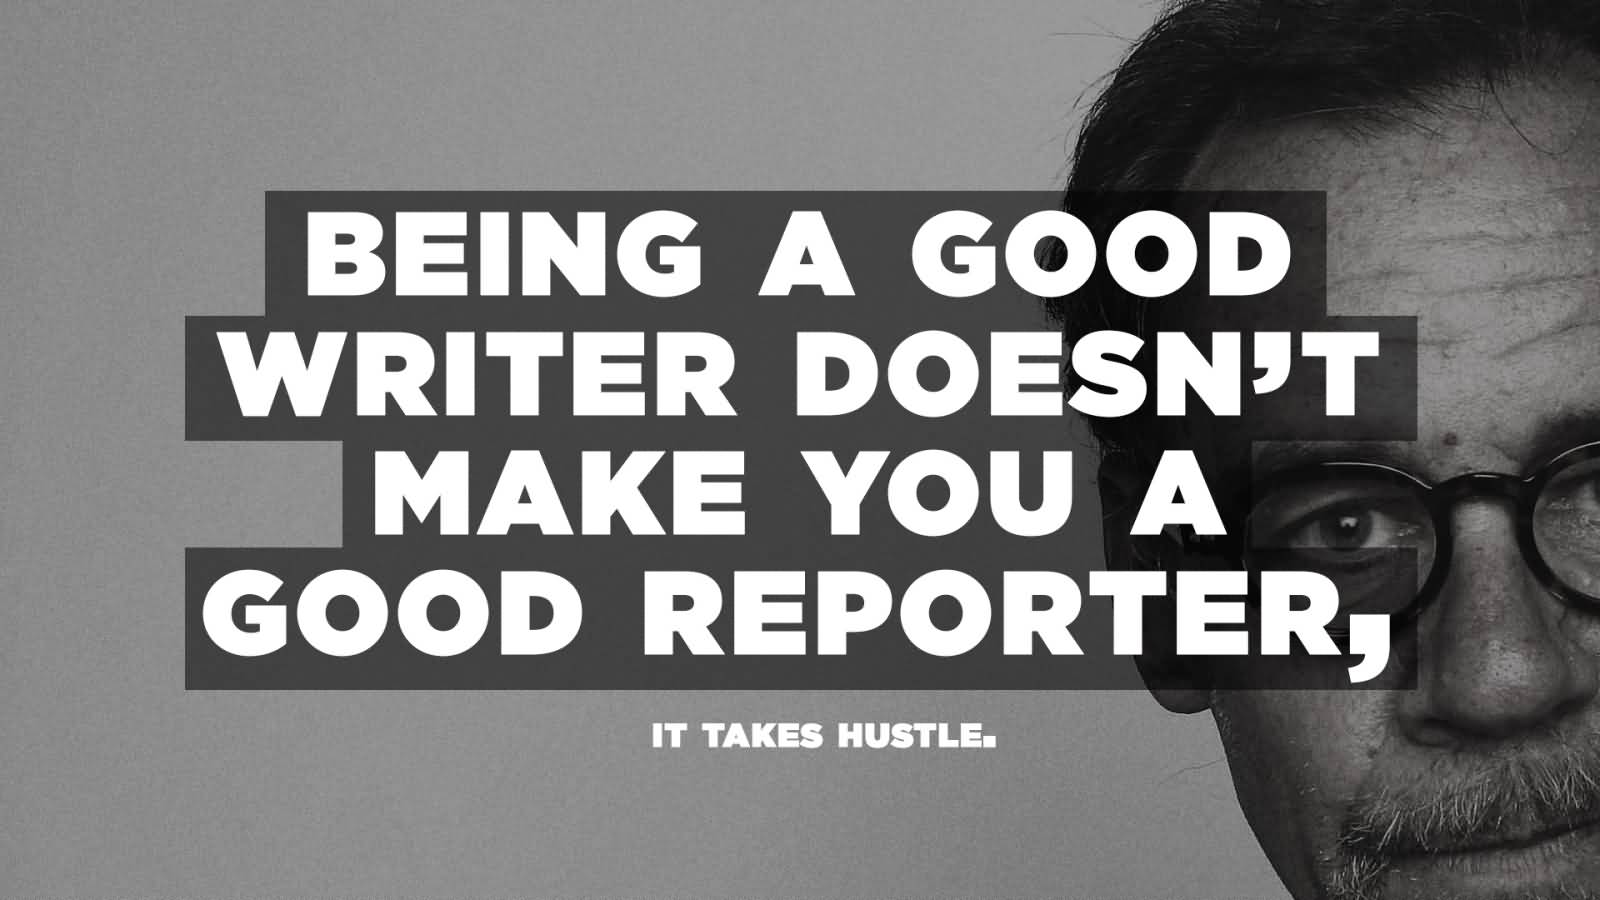 Being a good writer doesn’t make you a good reporter, it takes hustle